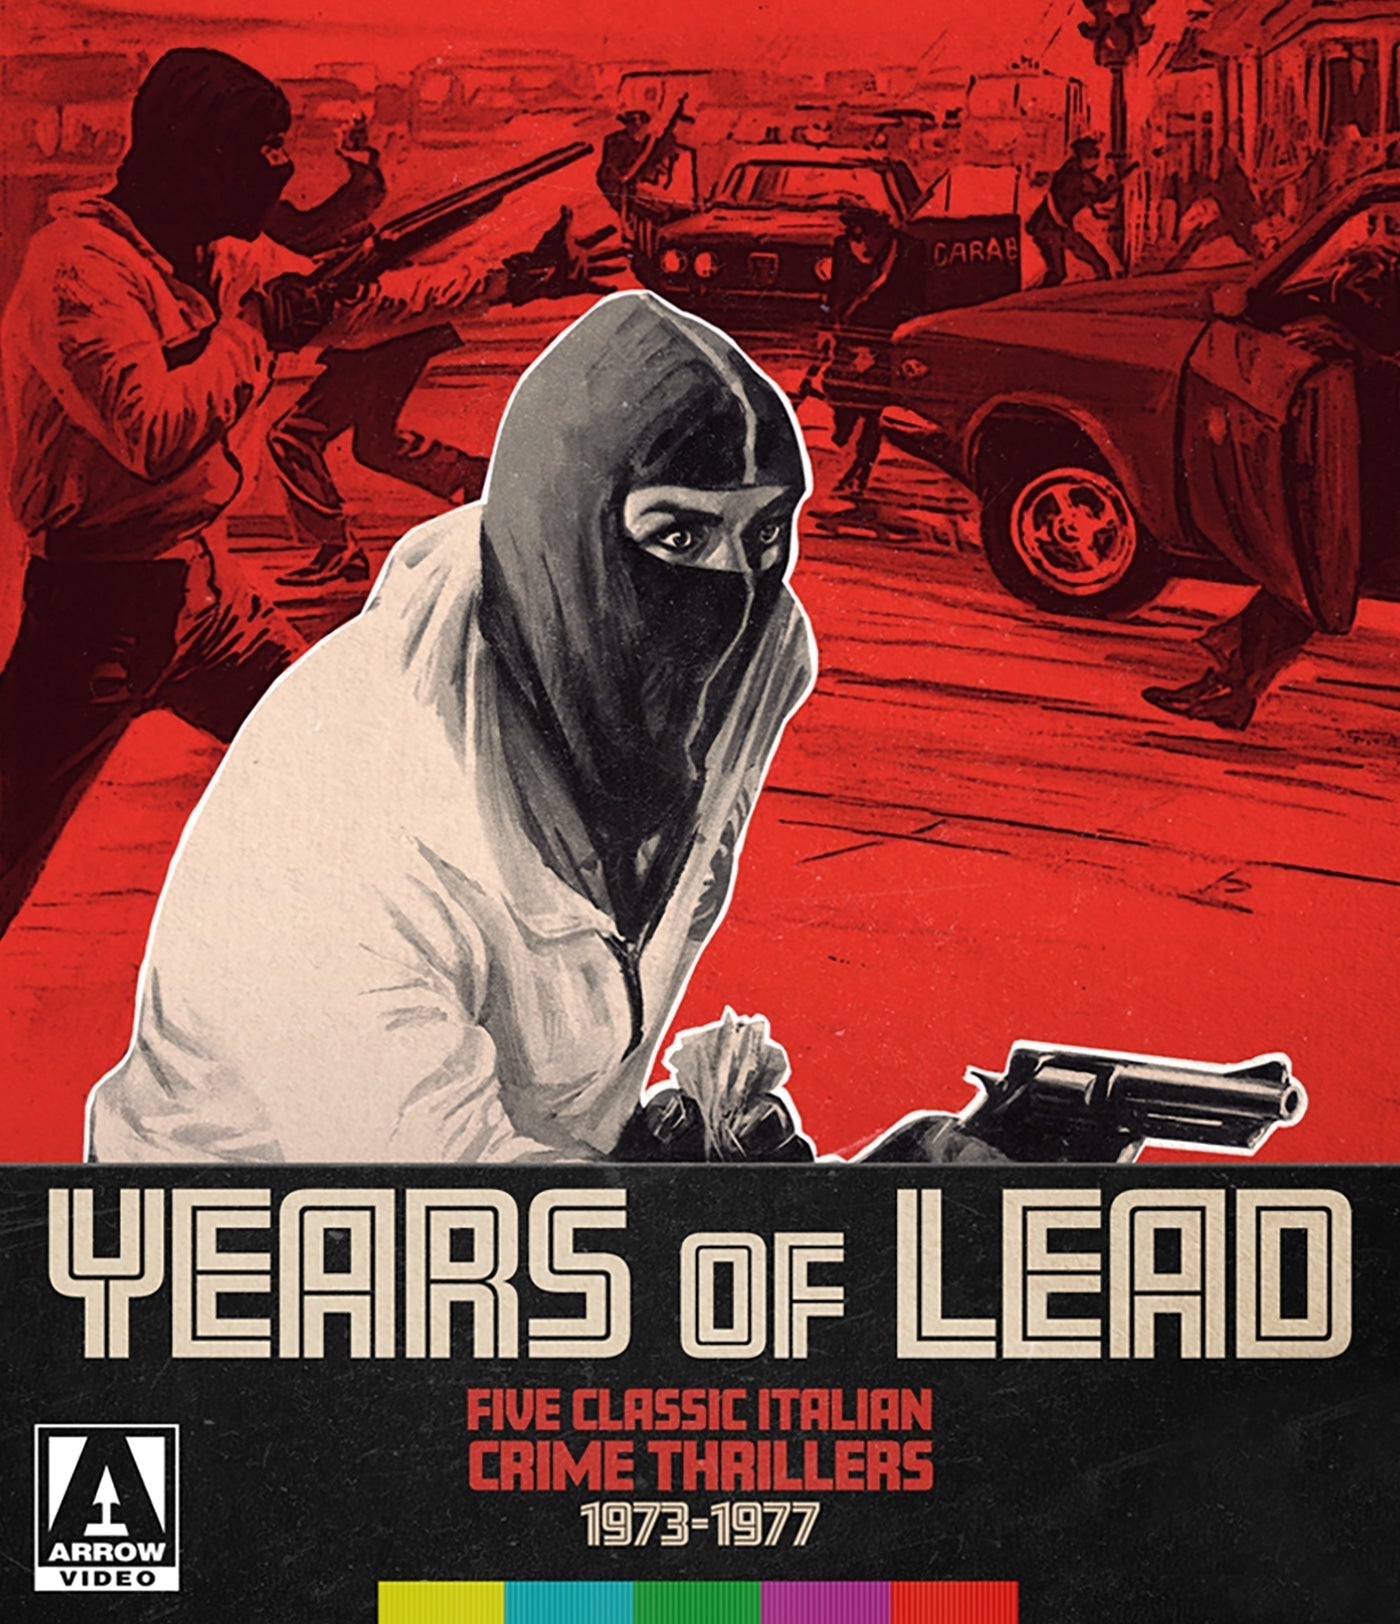 Years Of Lead: Five Classic Italian Crime Thrillers 1973-1977 (Limited Edition) Blu-Ray Blu-Ray